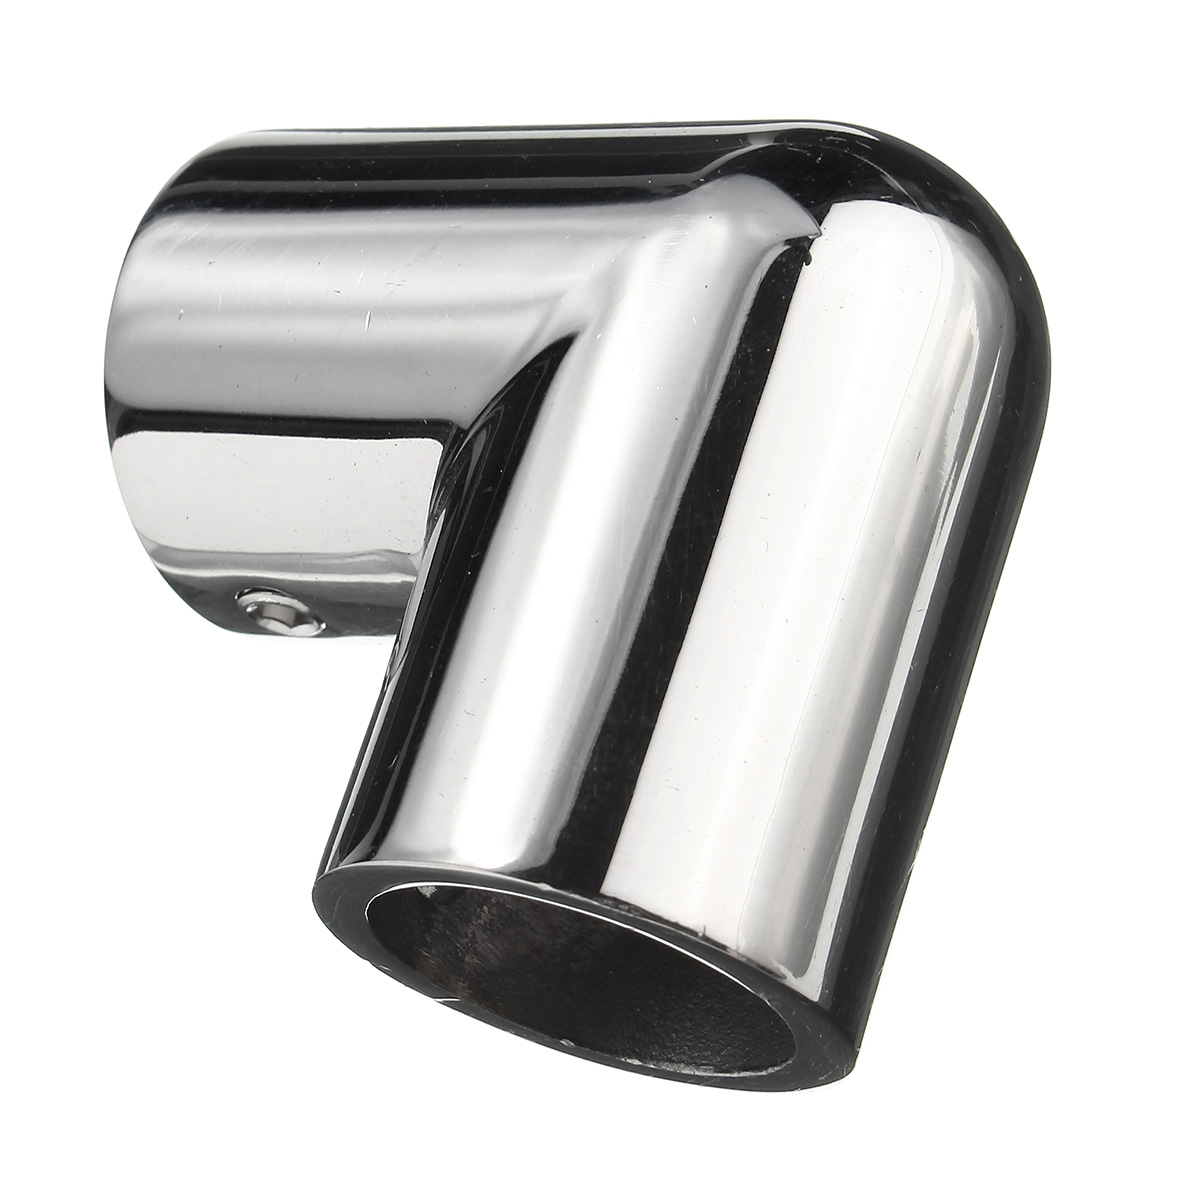 316 Grade Stainless Steel Marine Boat Handrail Fitting 90 Degree Elbow 1Inch Tube - Auto GoShop